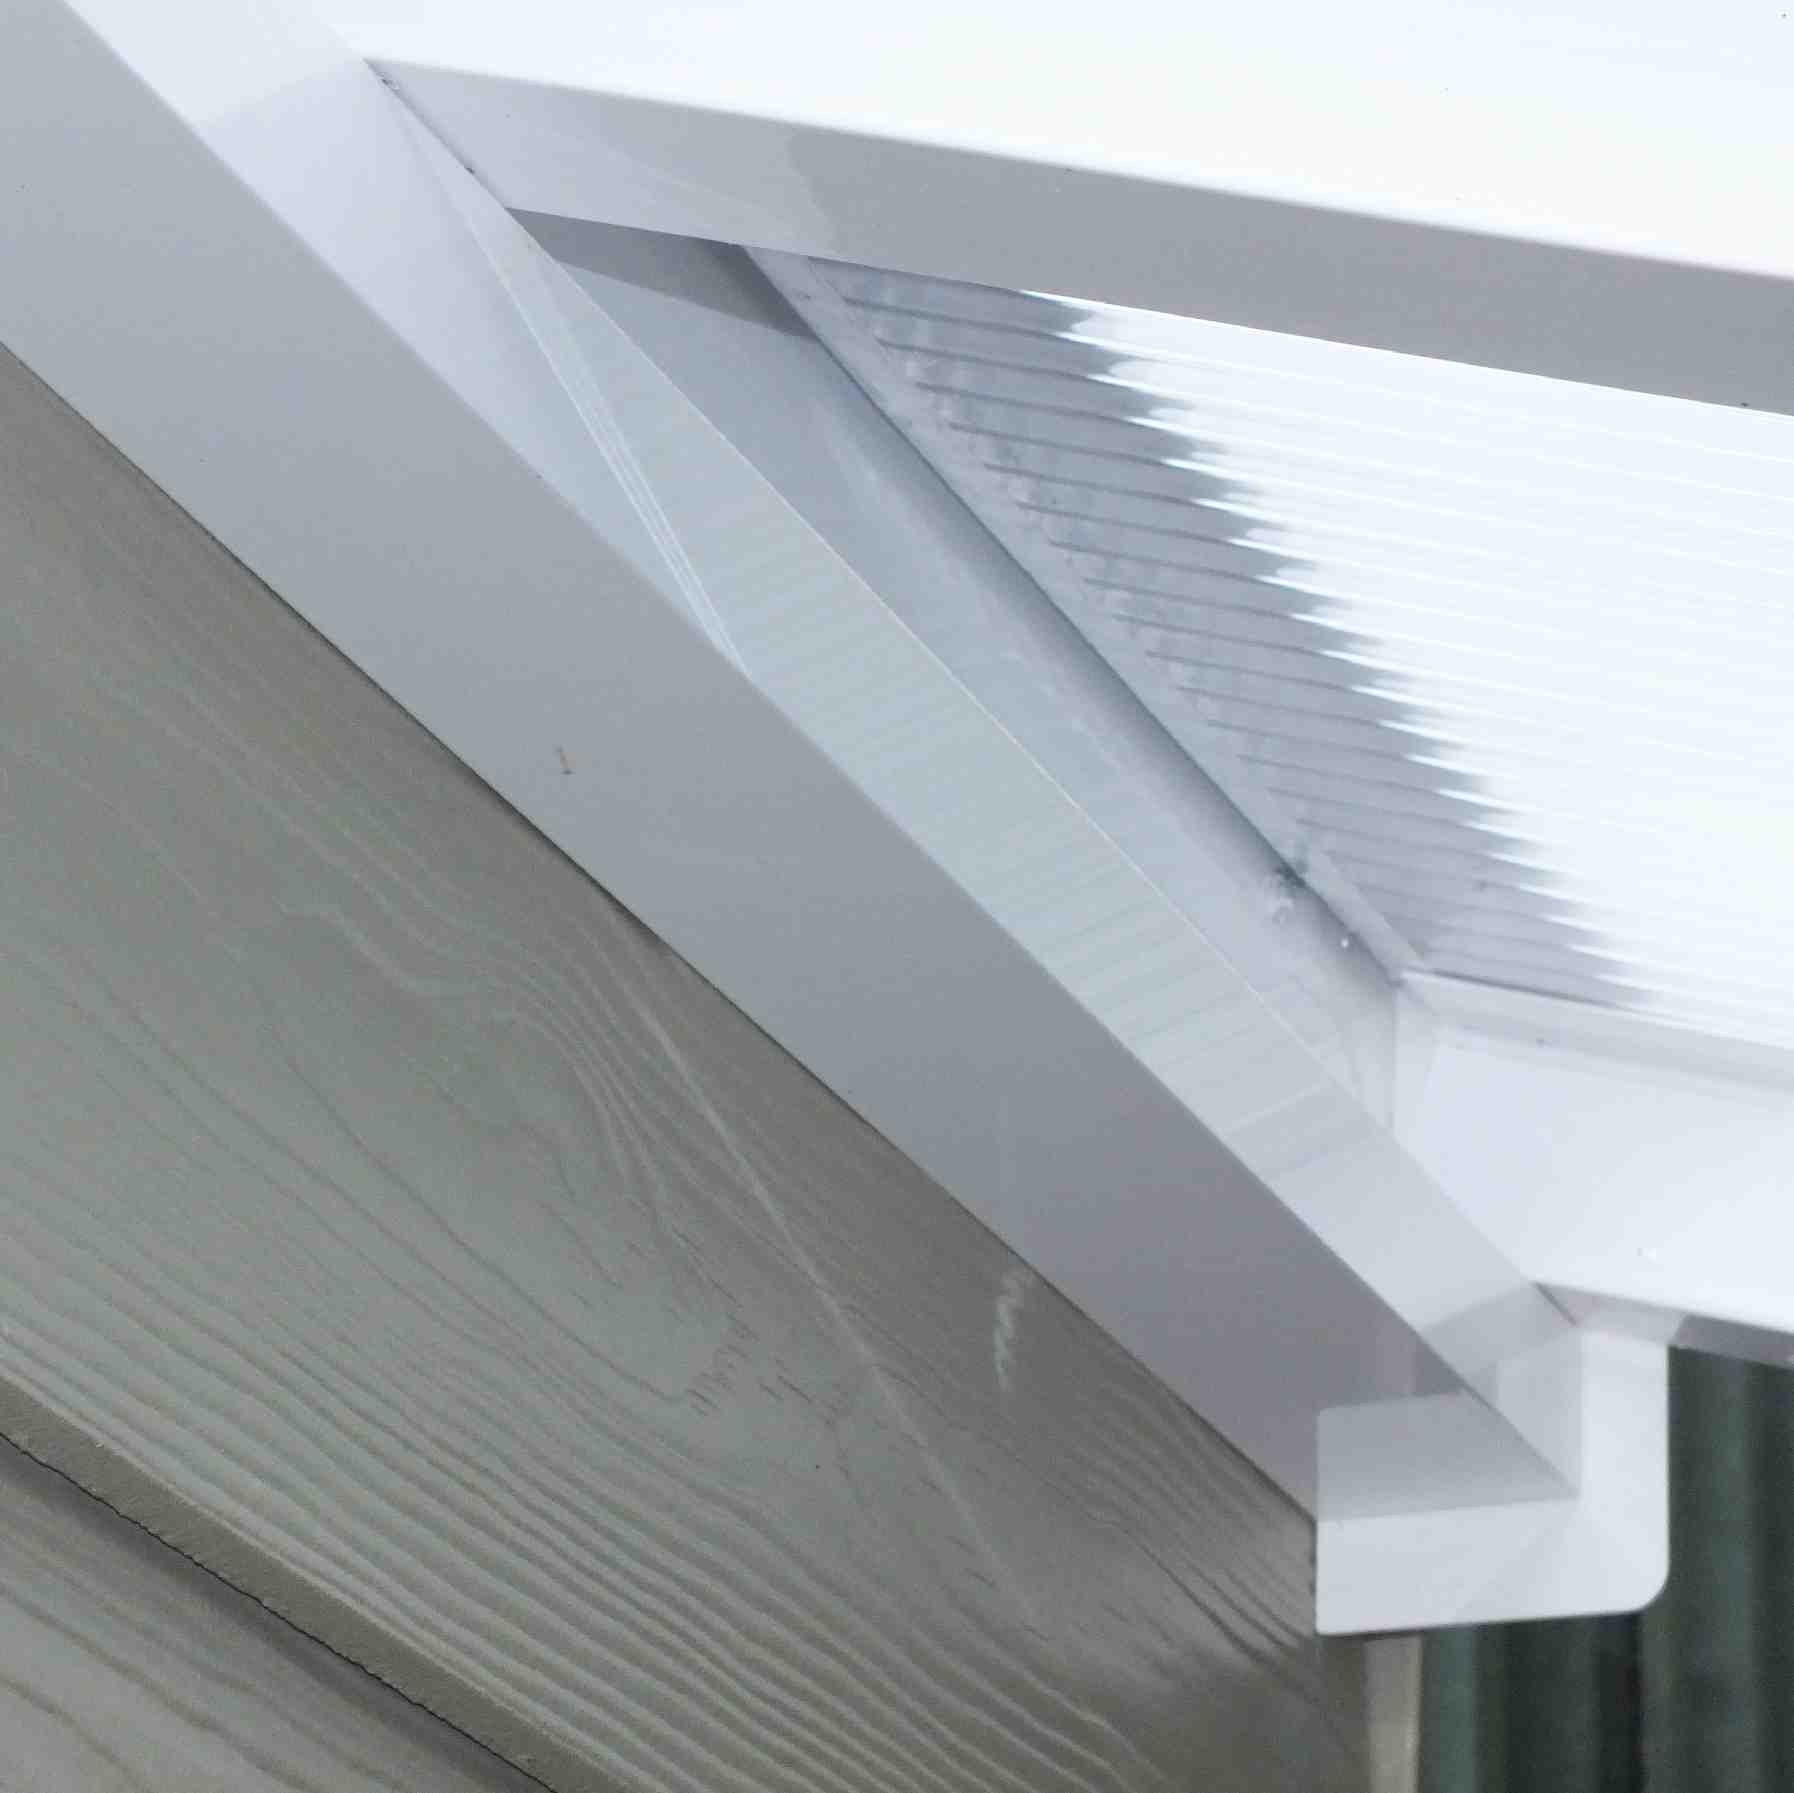 Great deals on Omega Verandah White with 6mm Glass Clear Plate Polycarbonate Glazing - 8.4m (W) x 3.5m (P), (4) Supporting Posts